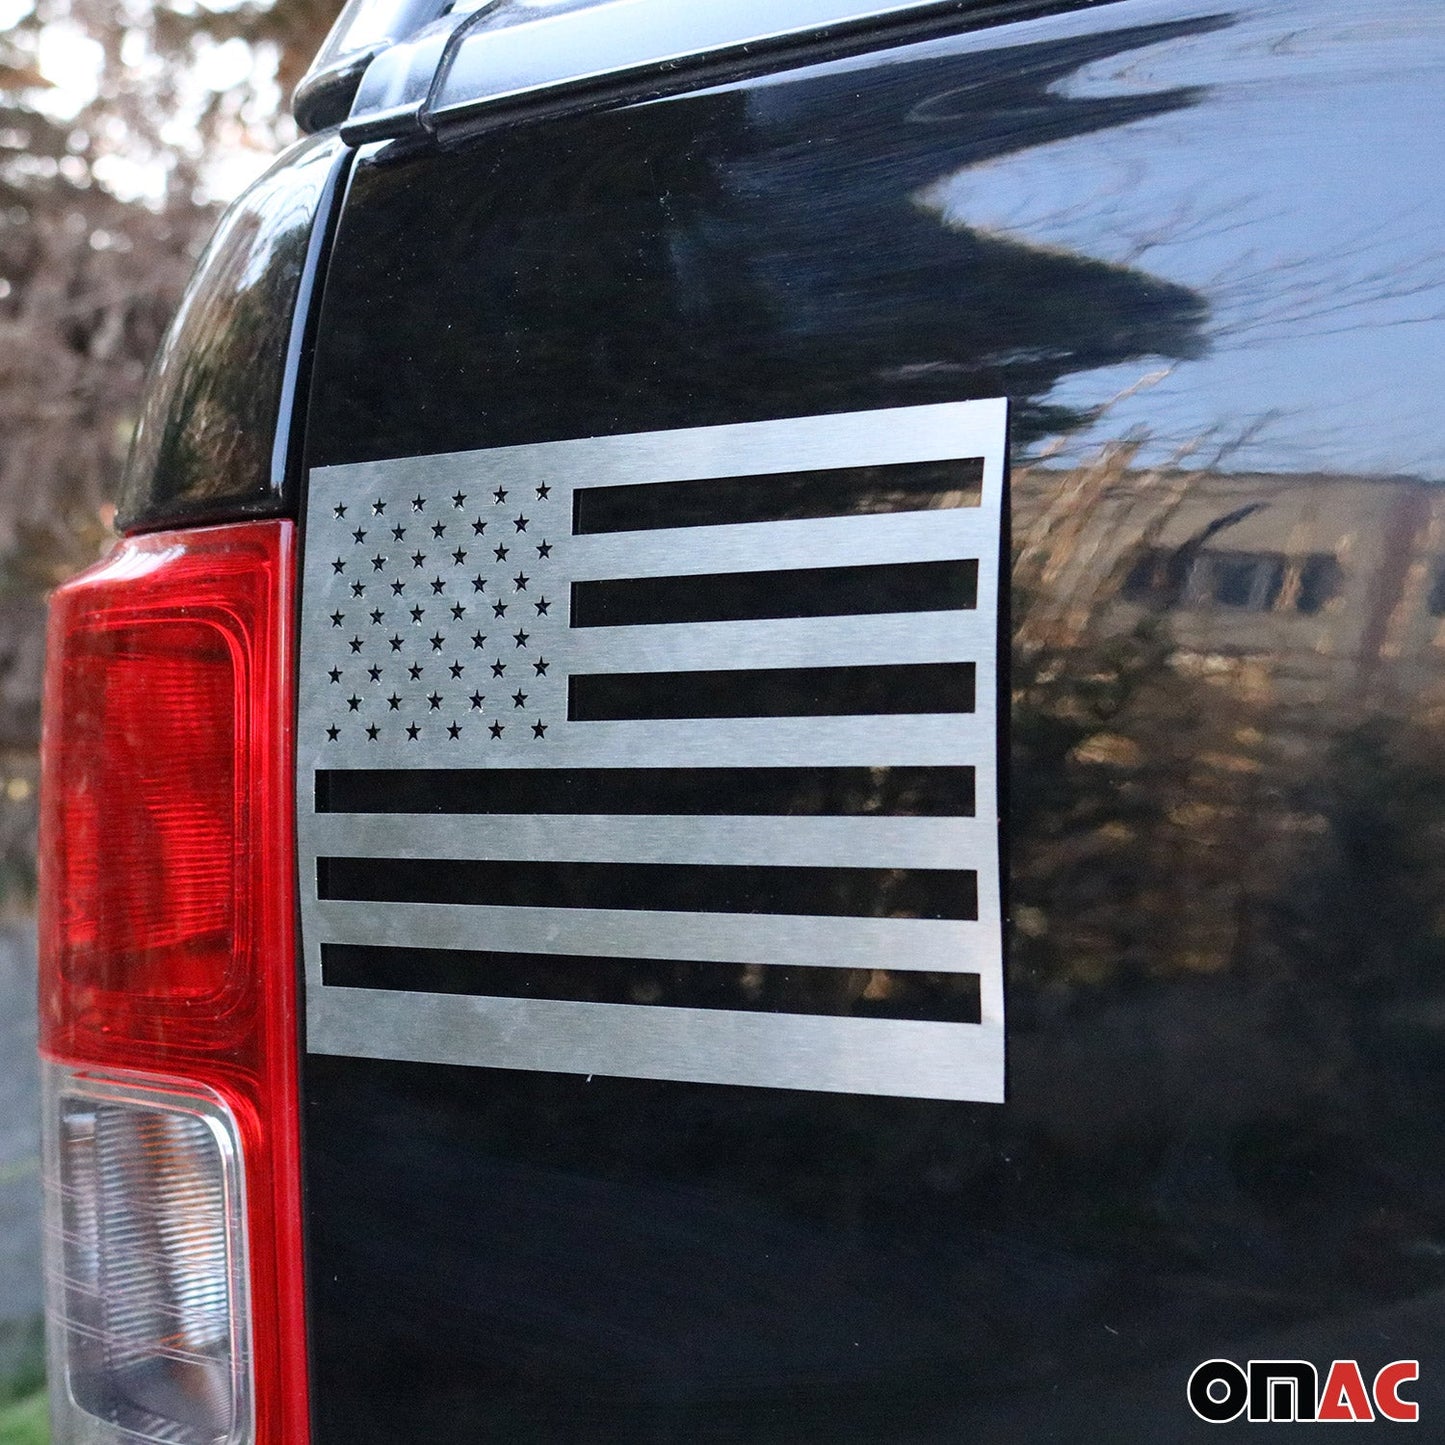 OMAC 2 Pcs US American Flag for Chevrolet Avalanche Brushed Chrome Decal S.Steel U022192